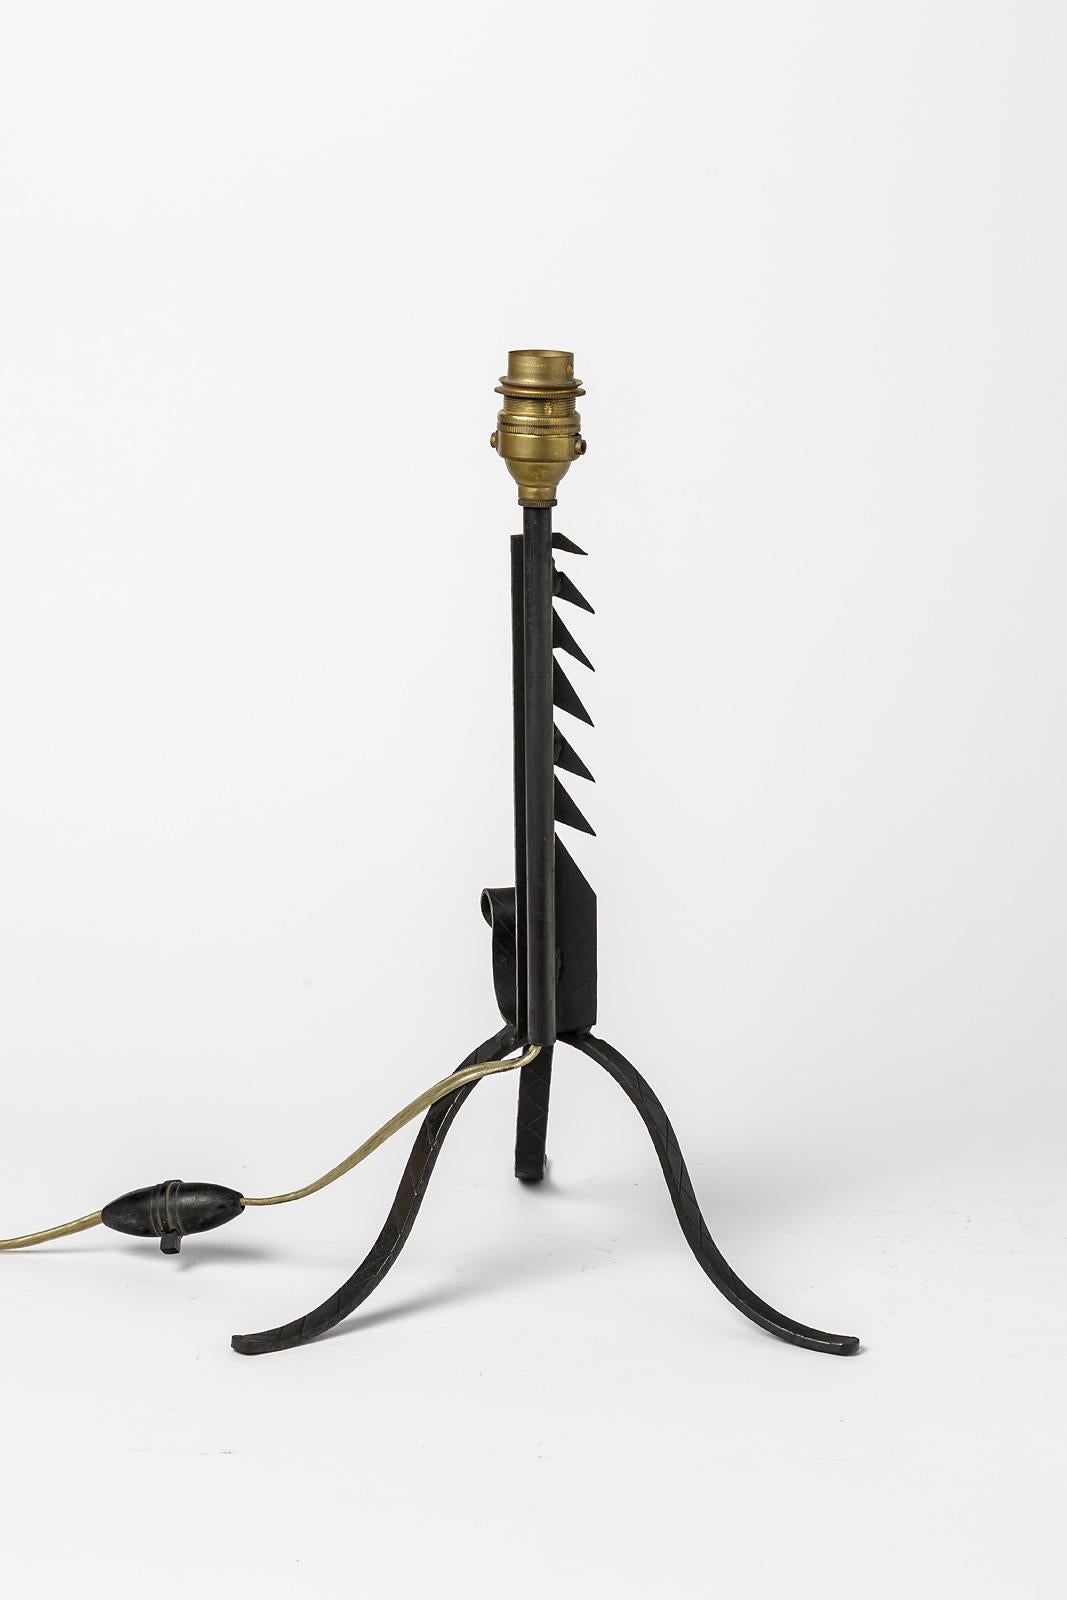 Brutalist Black Metal Table Lamp French 20th Century Design In Good Condition For Sale In Neuilly-en- sancerre, FR